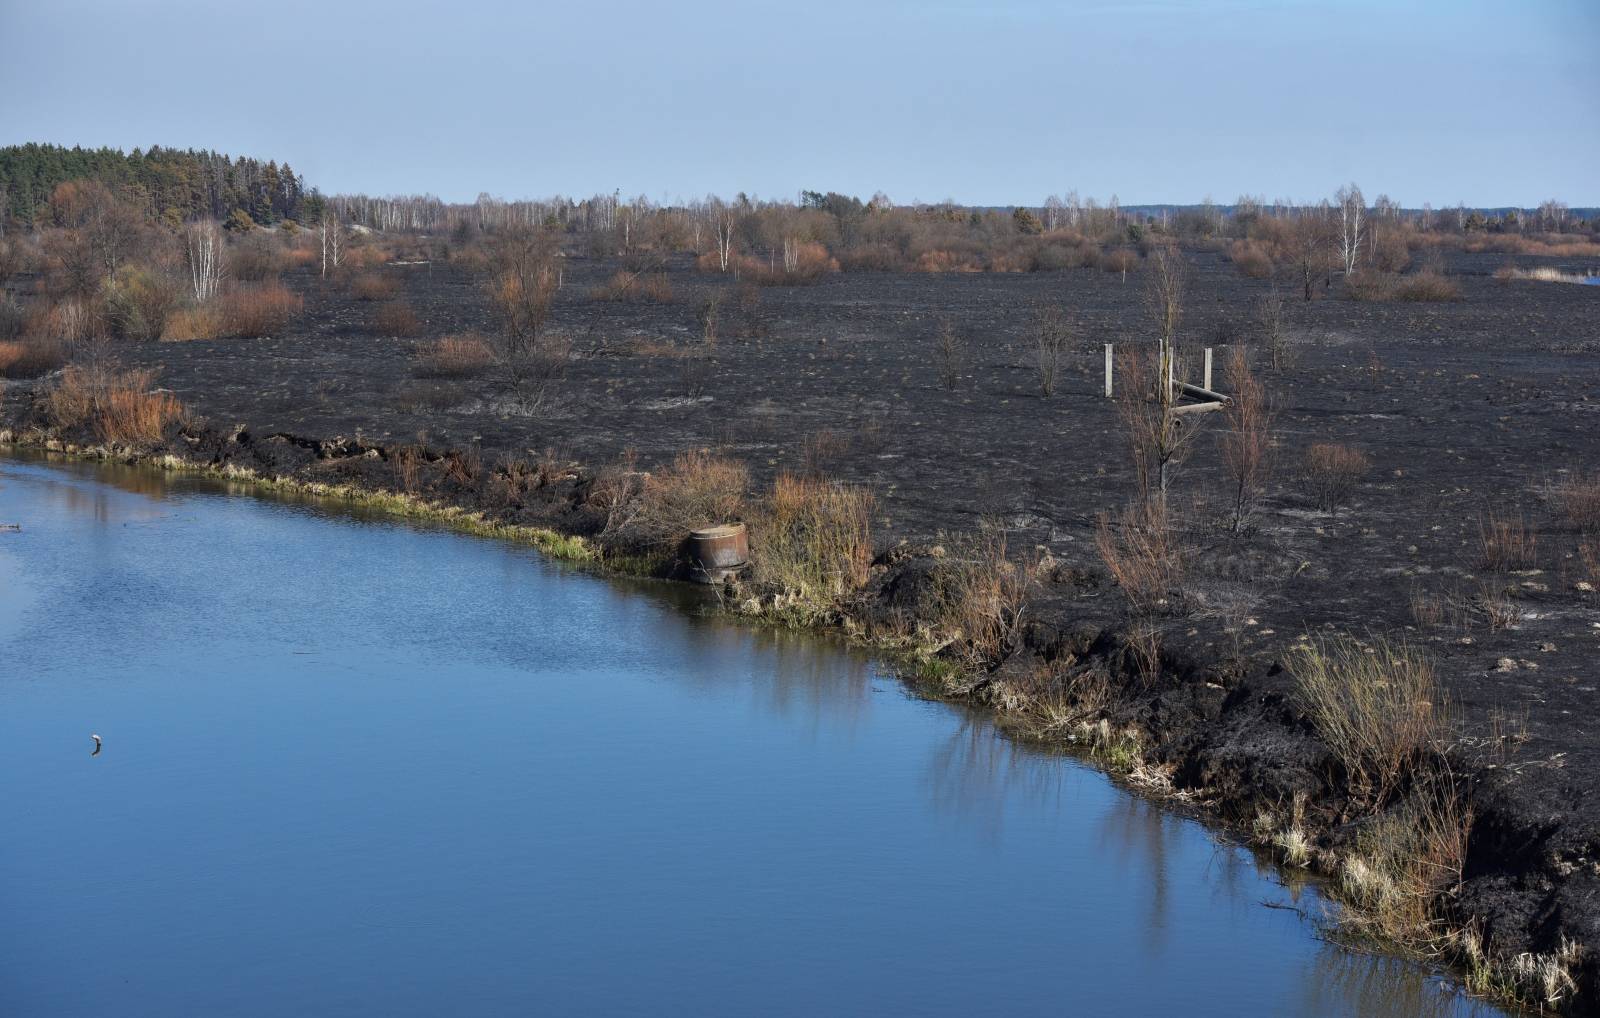 A view shows burned bushes and grass after a forest fire outside the settlement of Poliske located in the exclusion zone around the Chernobyl nuclear power plant